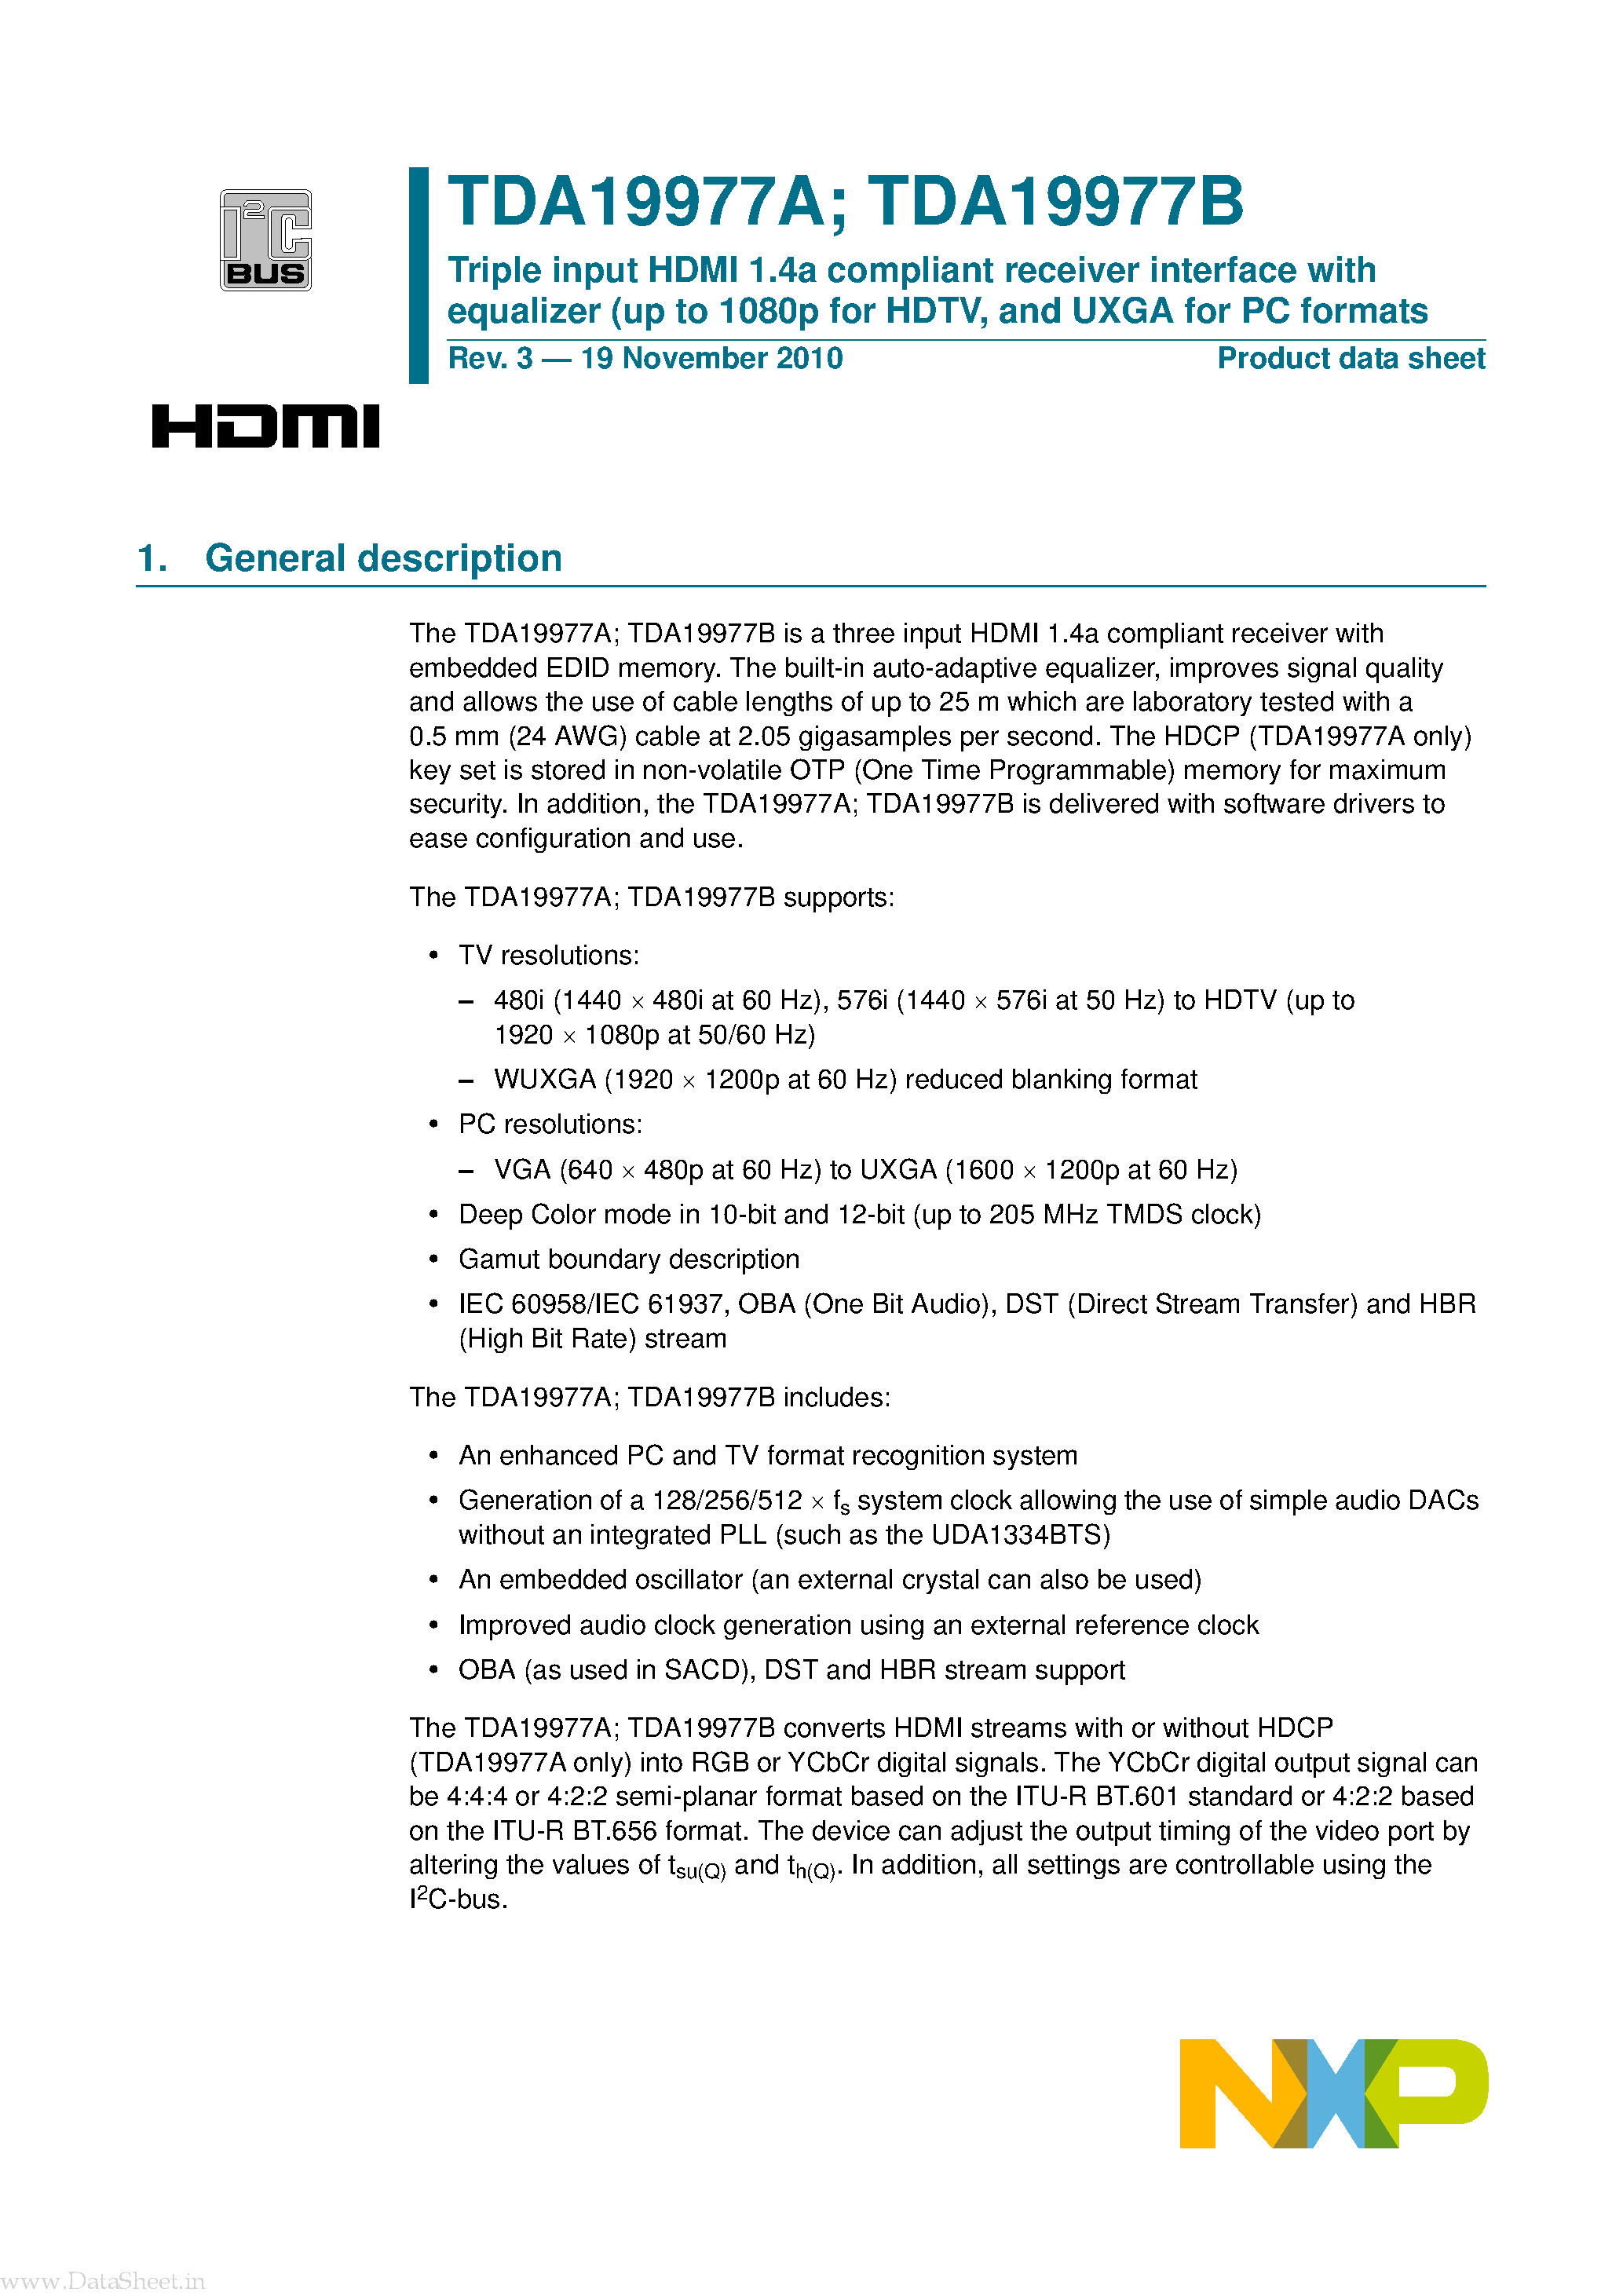 Datasheet TDA19977B - Triple input HDMI 1.4a compliant receiver interface page 1